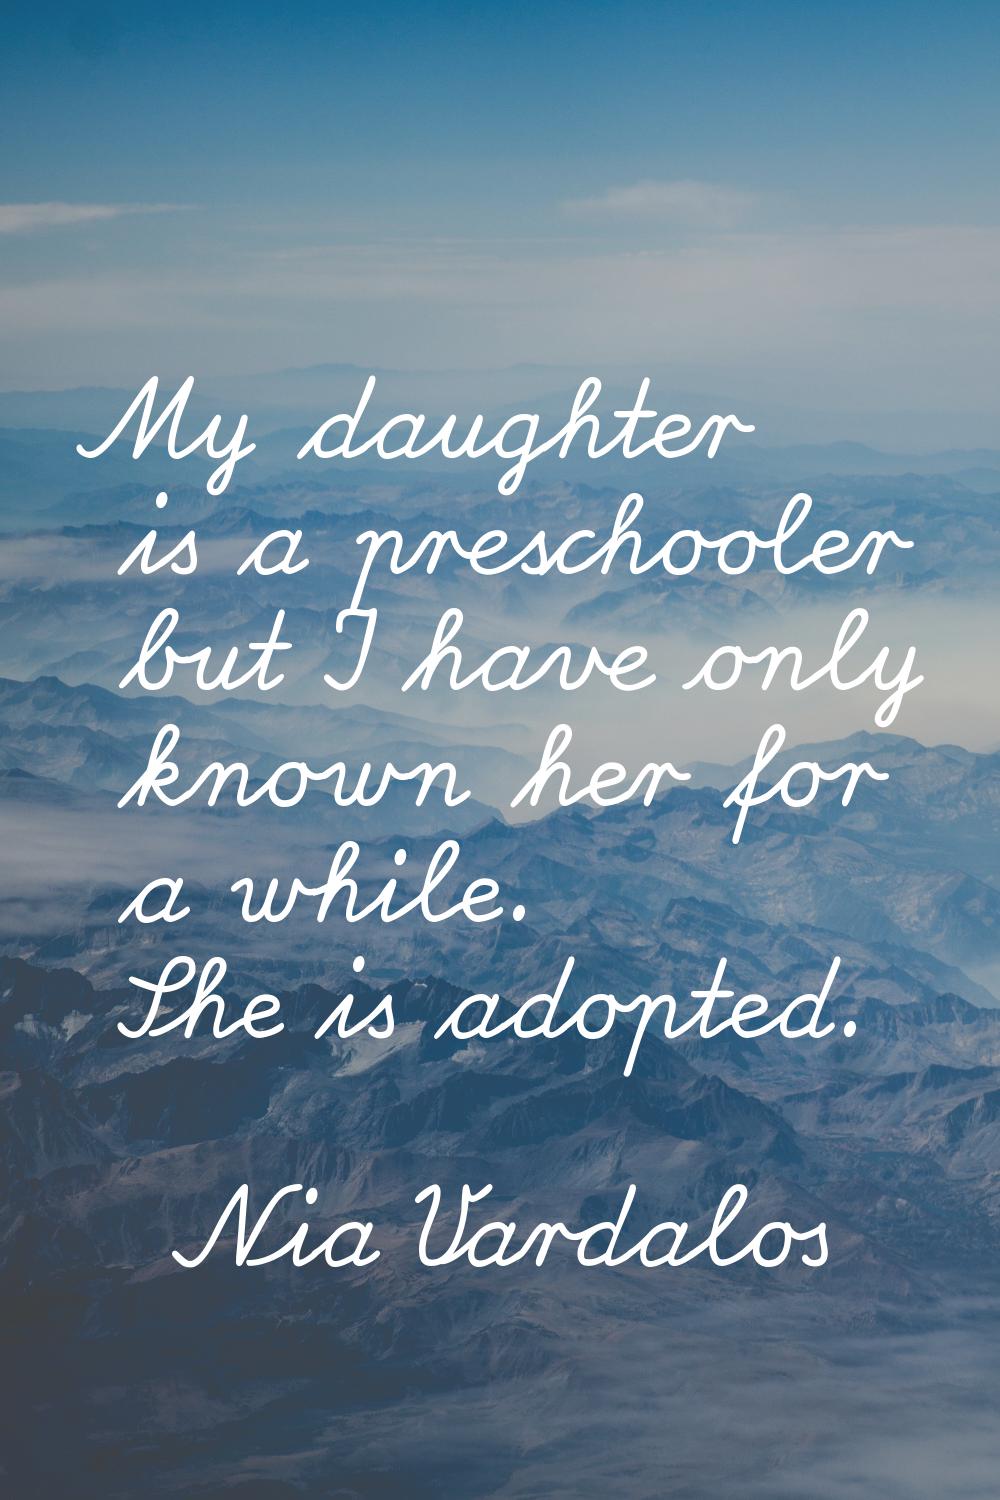 My daughter is a preschooler but I have only known her for a while. She is adopted.